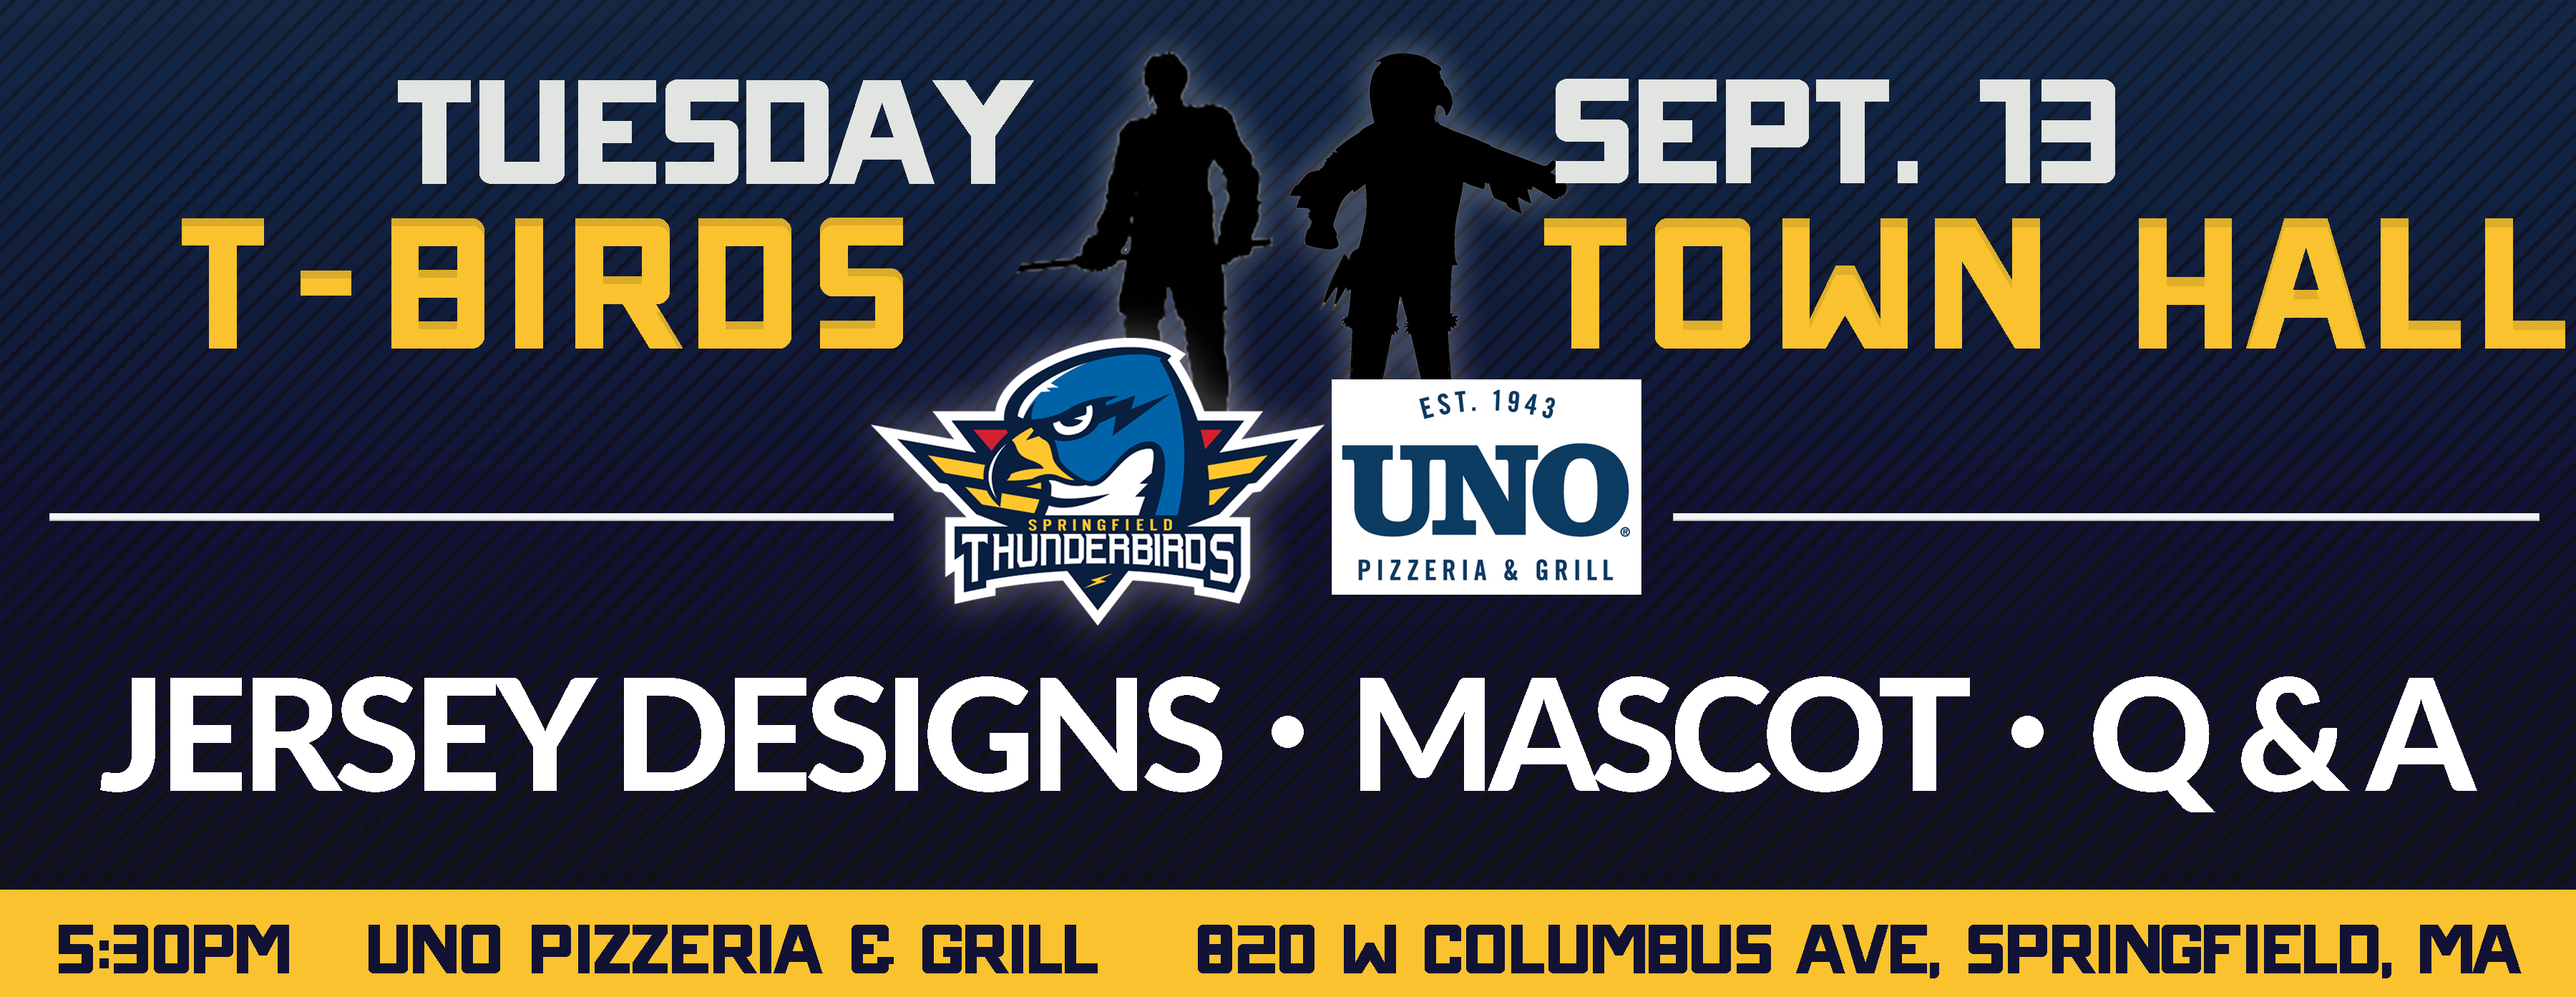 Thunderbirds to Unveil Jersey Designs & Mascot Tuesday